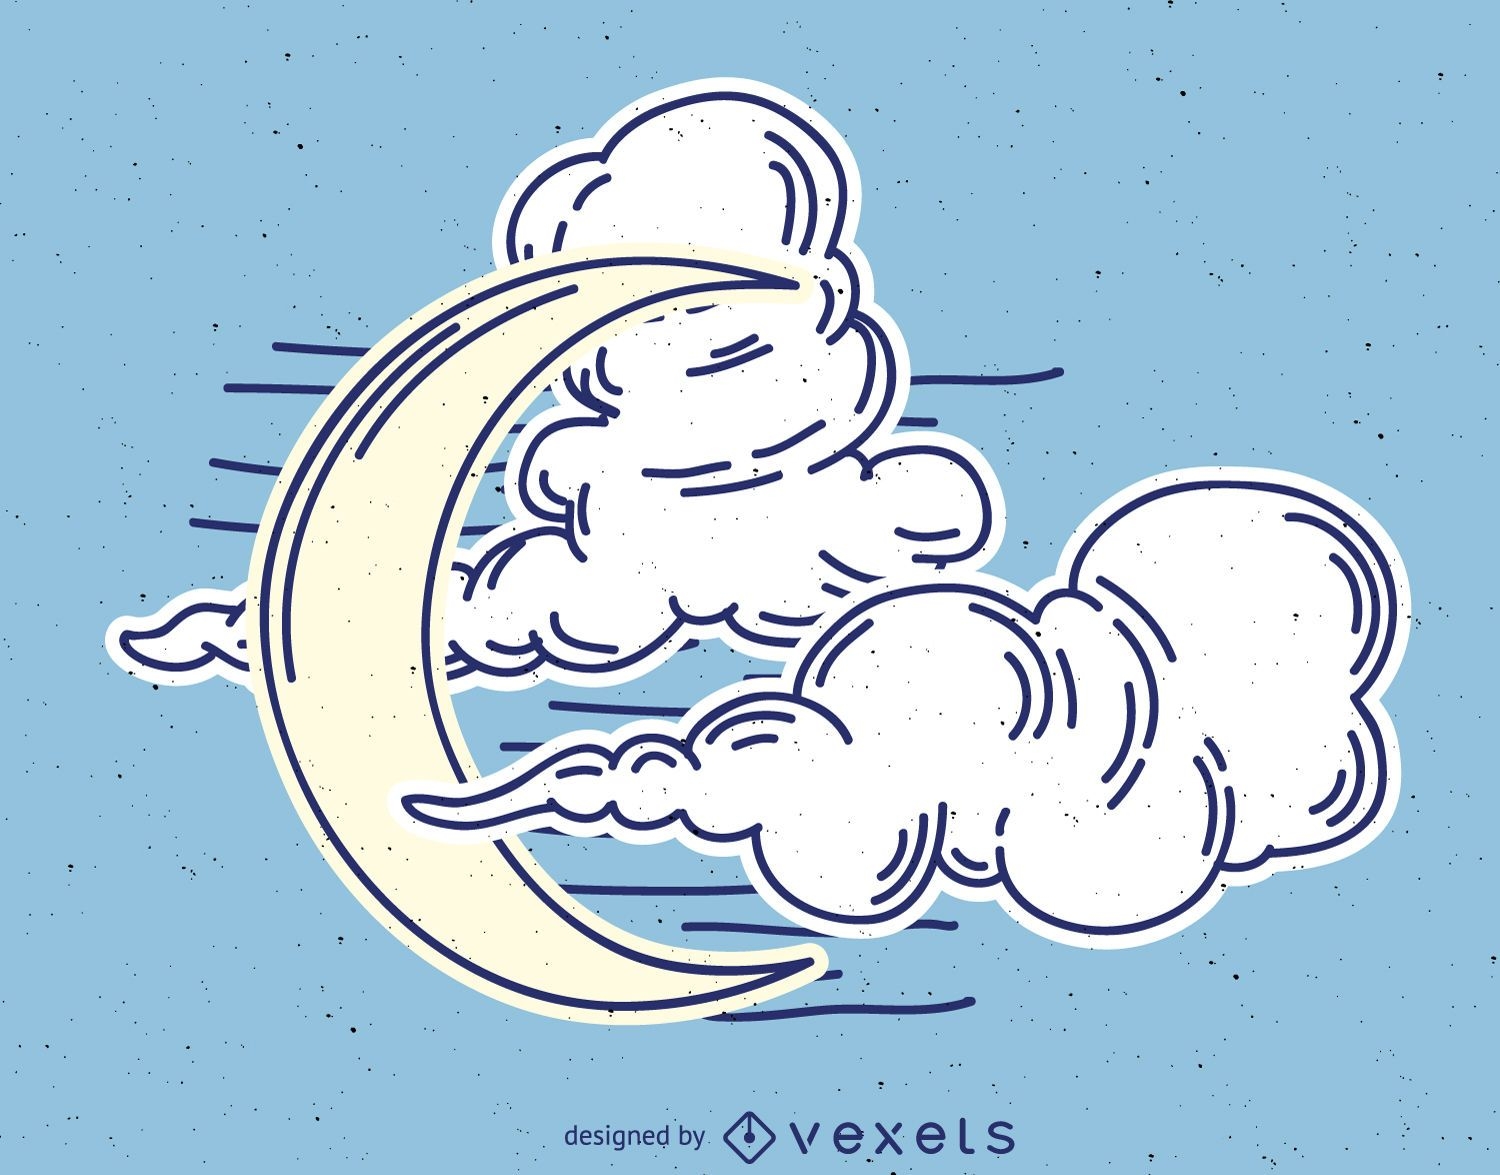 Moon drawing with clouds